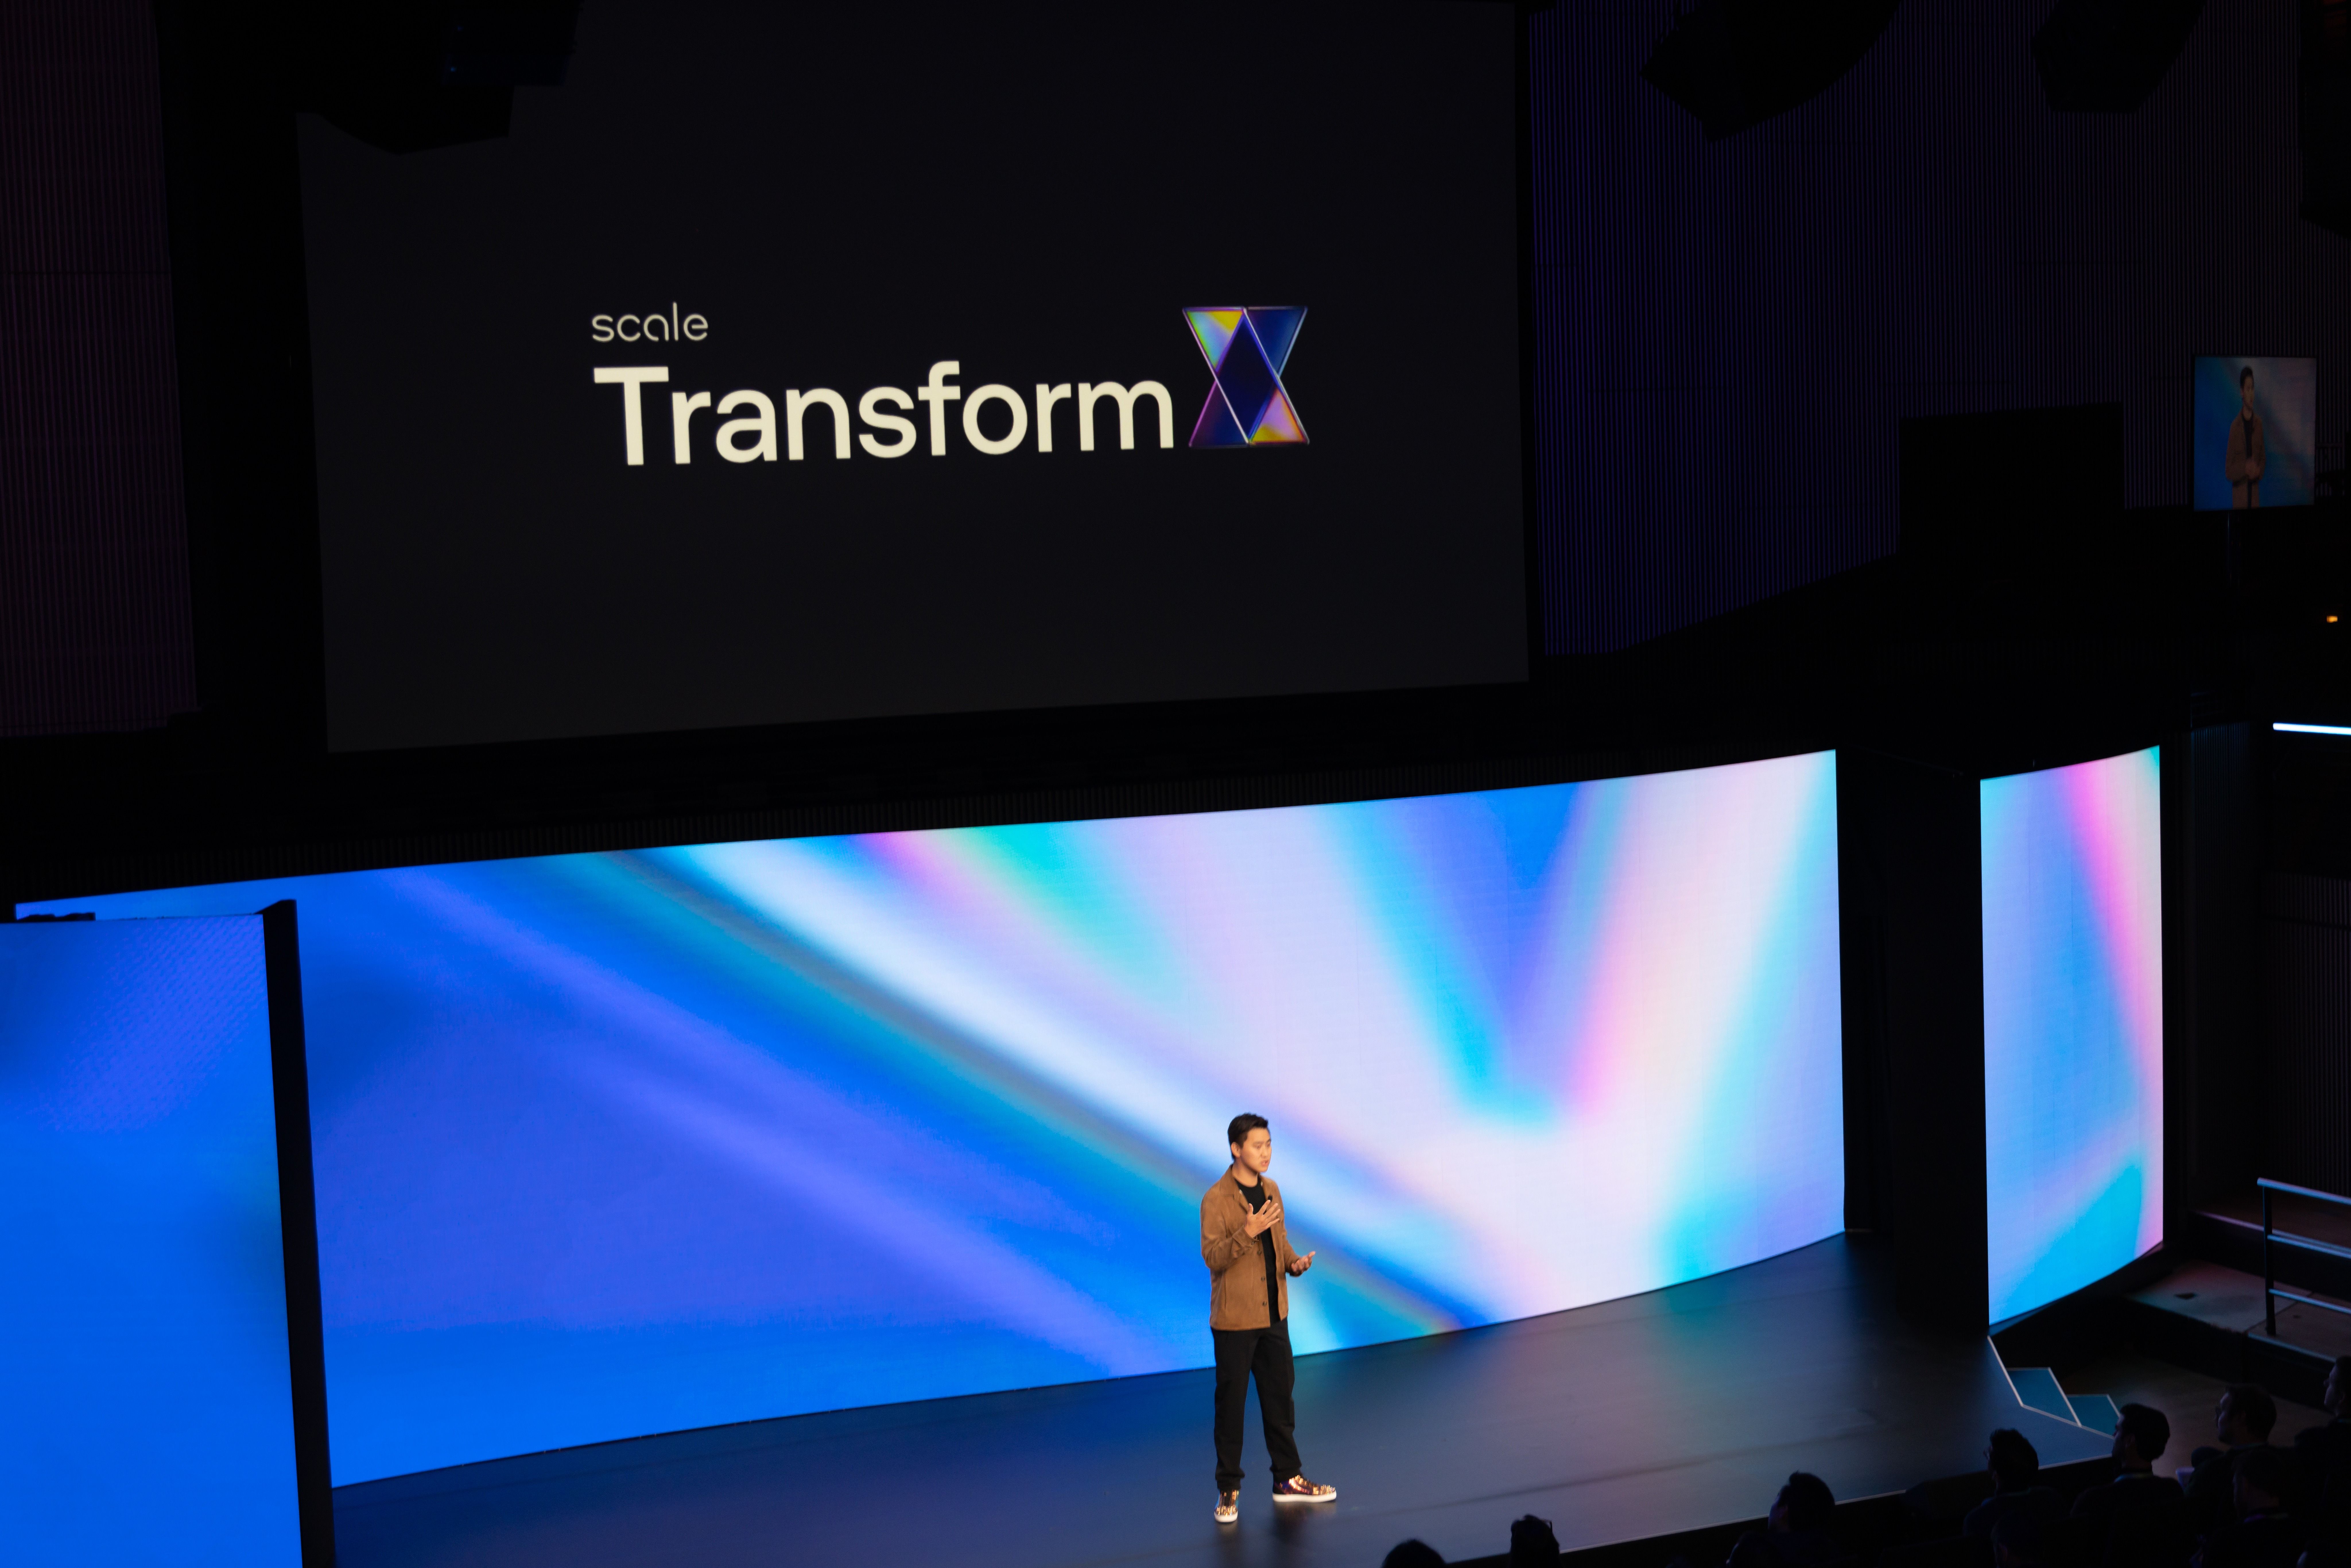 Alex presents at Scale's TransformX Conference, an event that brought together 30,000 AI leaders and practitioners, and over 120 of the world's brightest AI leaders, visionaries, practitioners, and researchers across industries to explore operationalizing AI and Machine Learning.